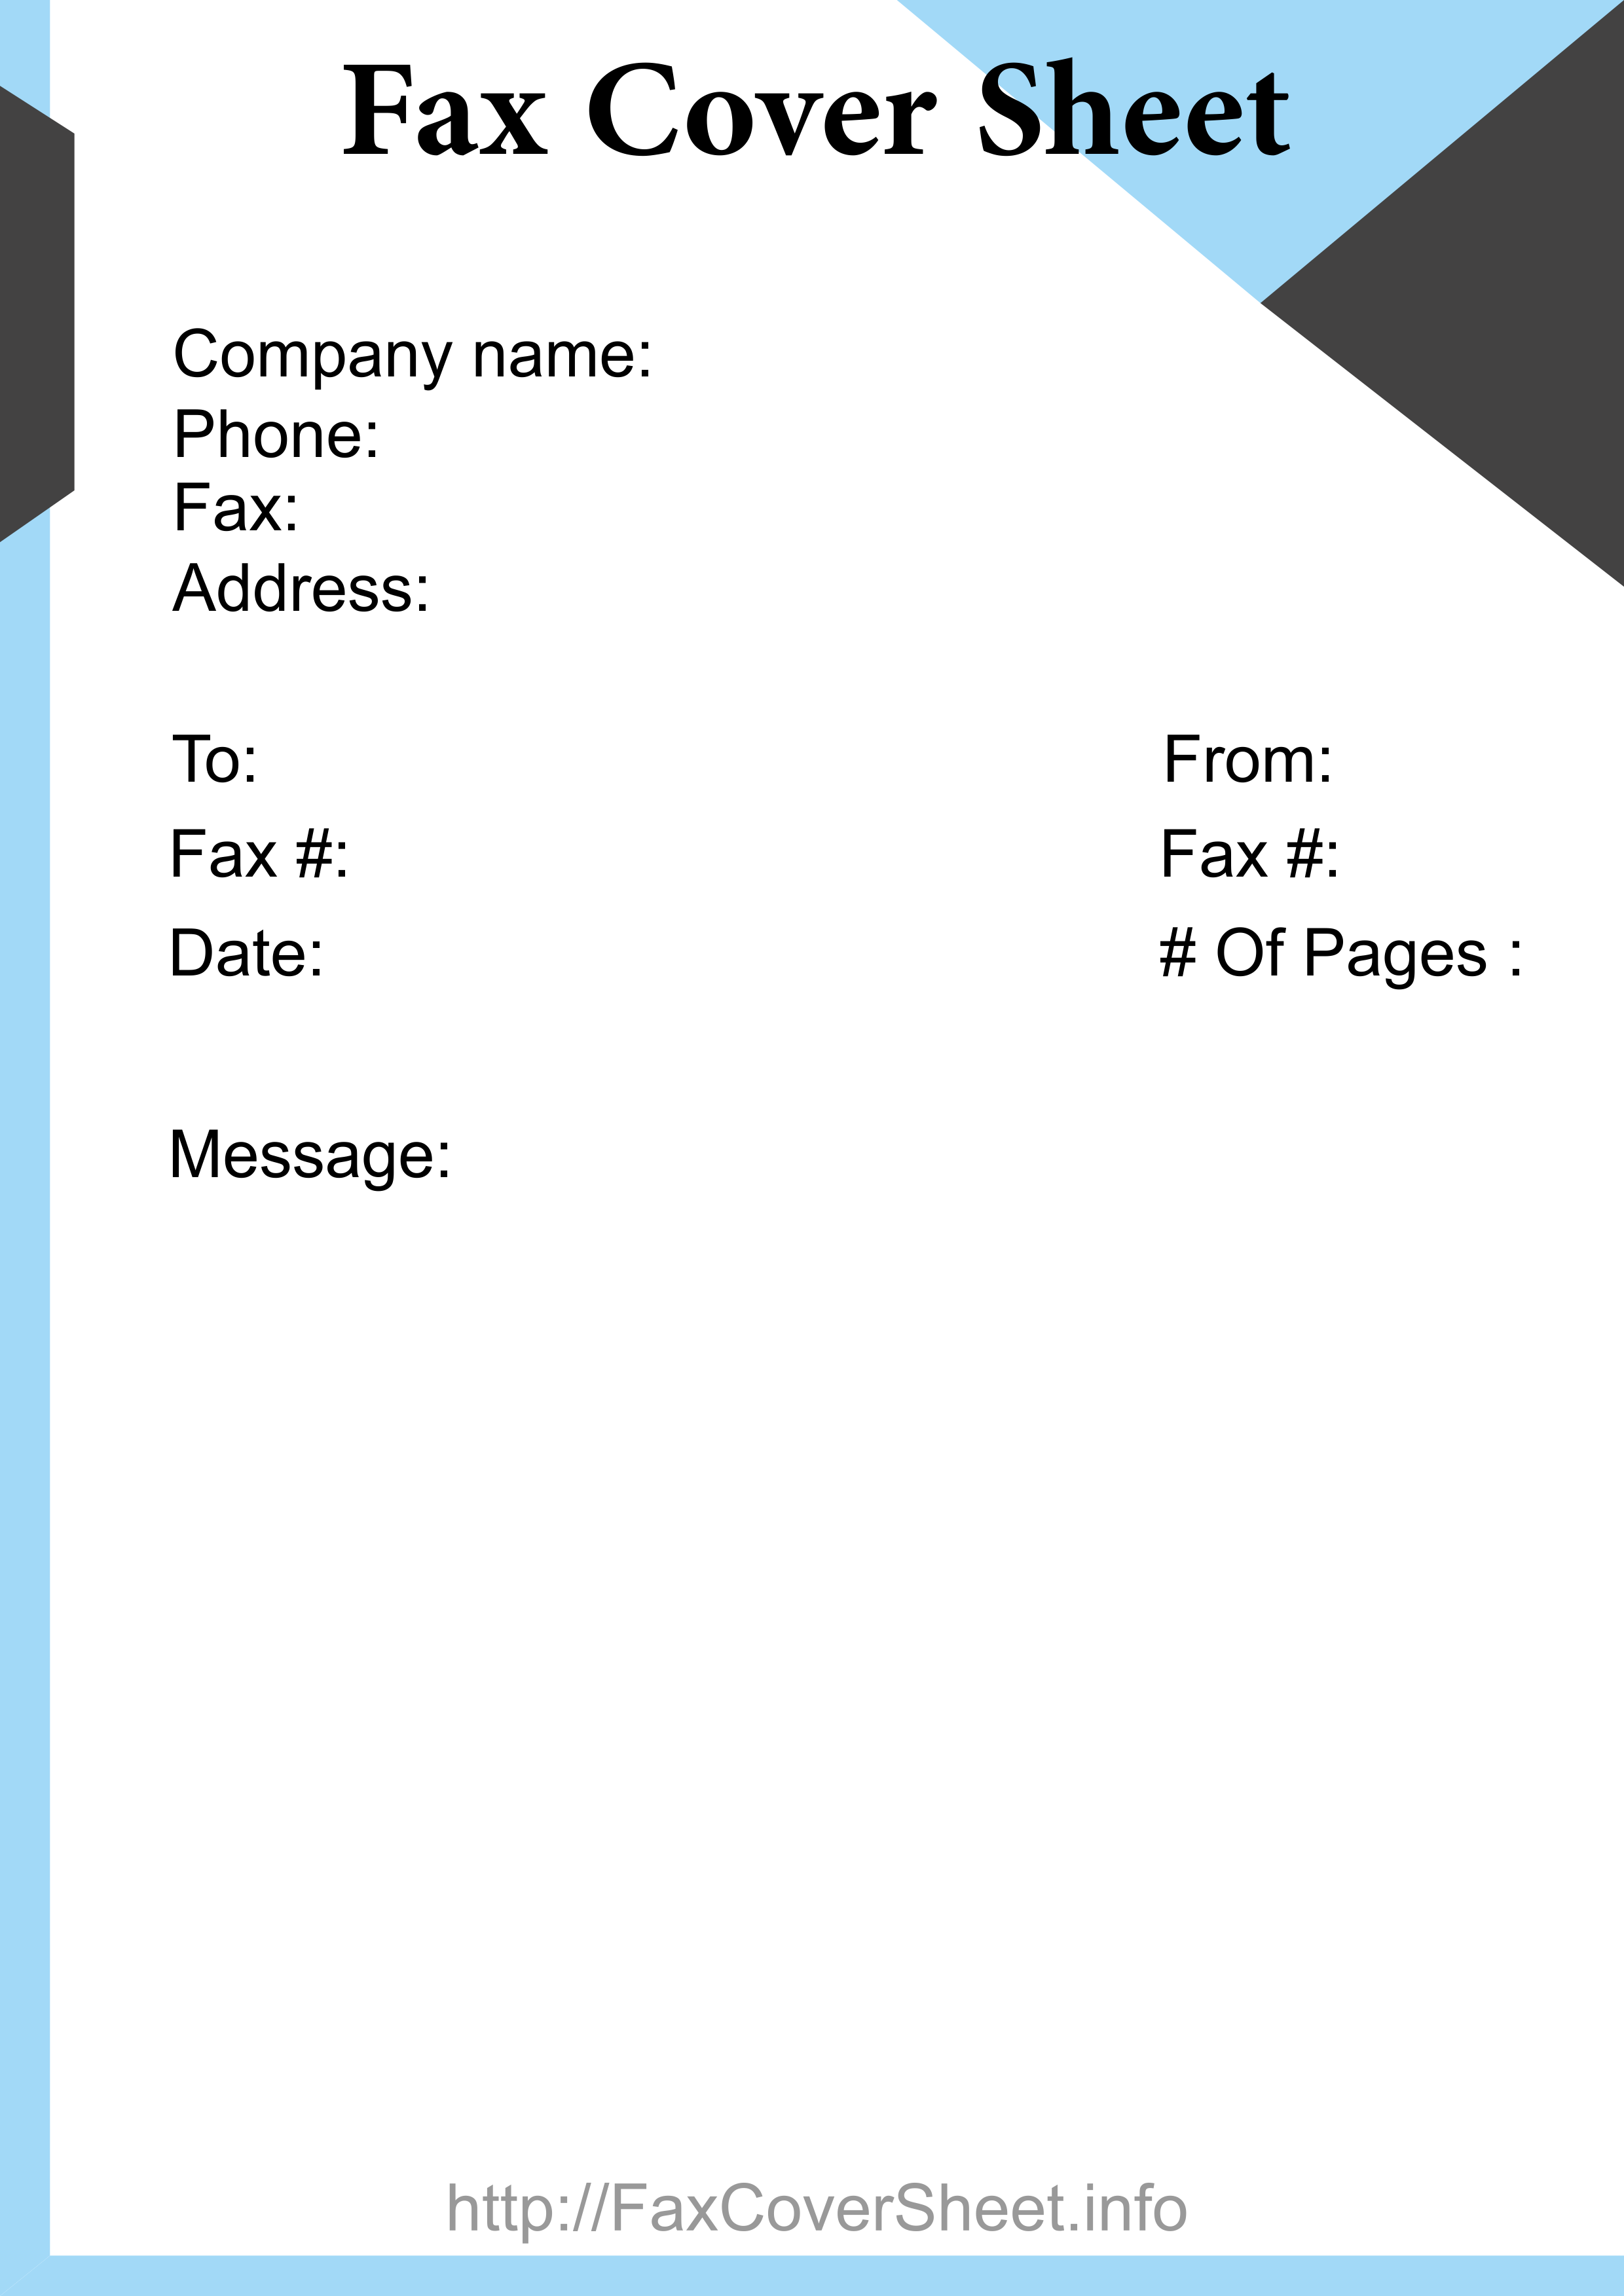 Basic Fax Cover Sheet